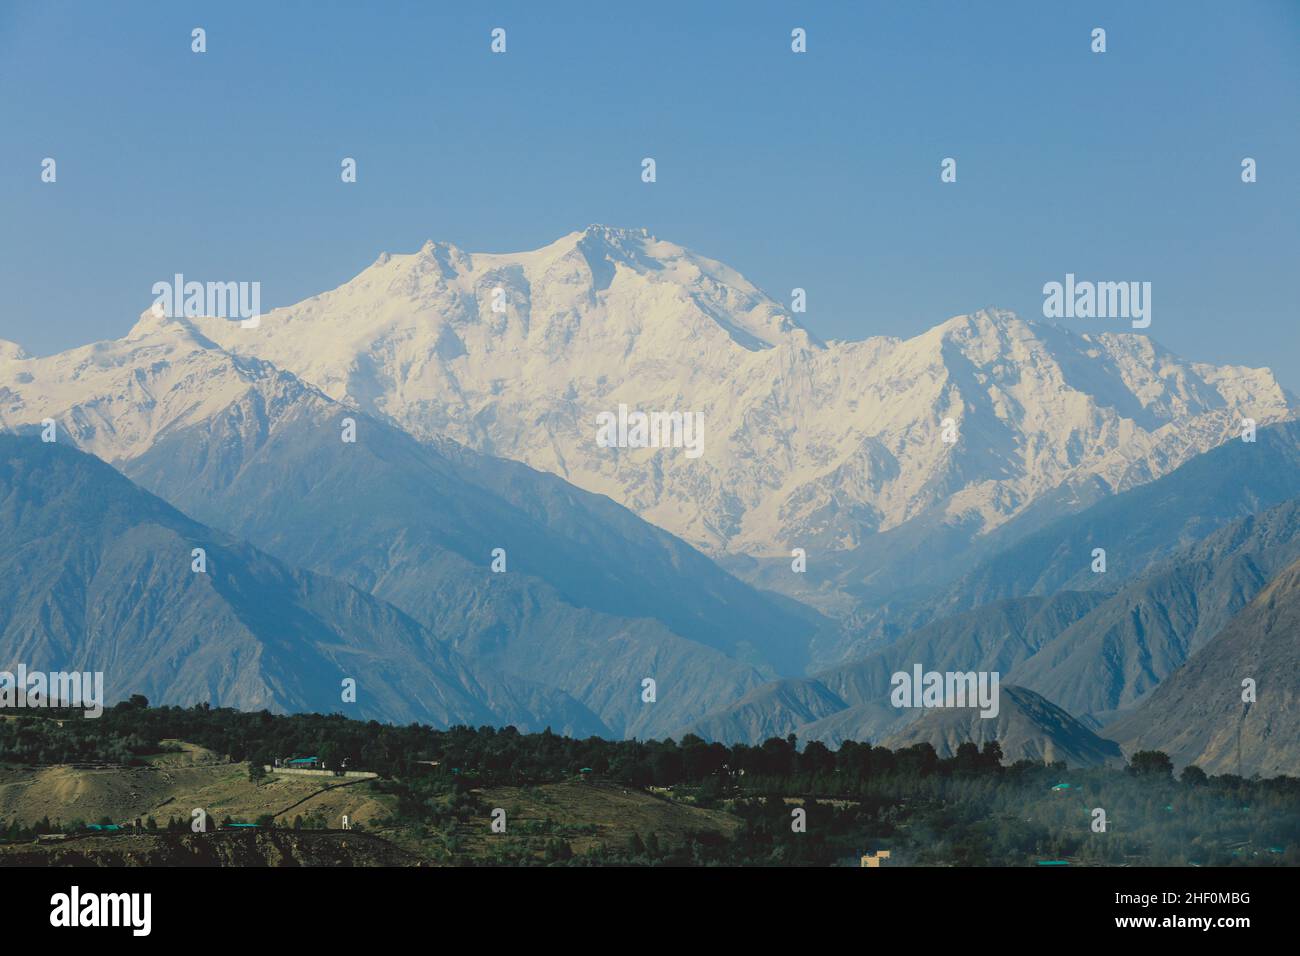 Amazing View to the Snow Capped Mountain Peaks in the Gilgit Baltistan Highlands under the Blue Sky, Pakistan Stock Photo